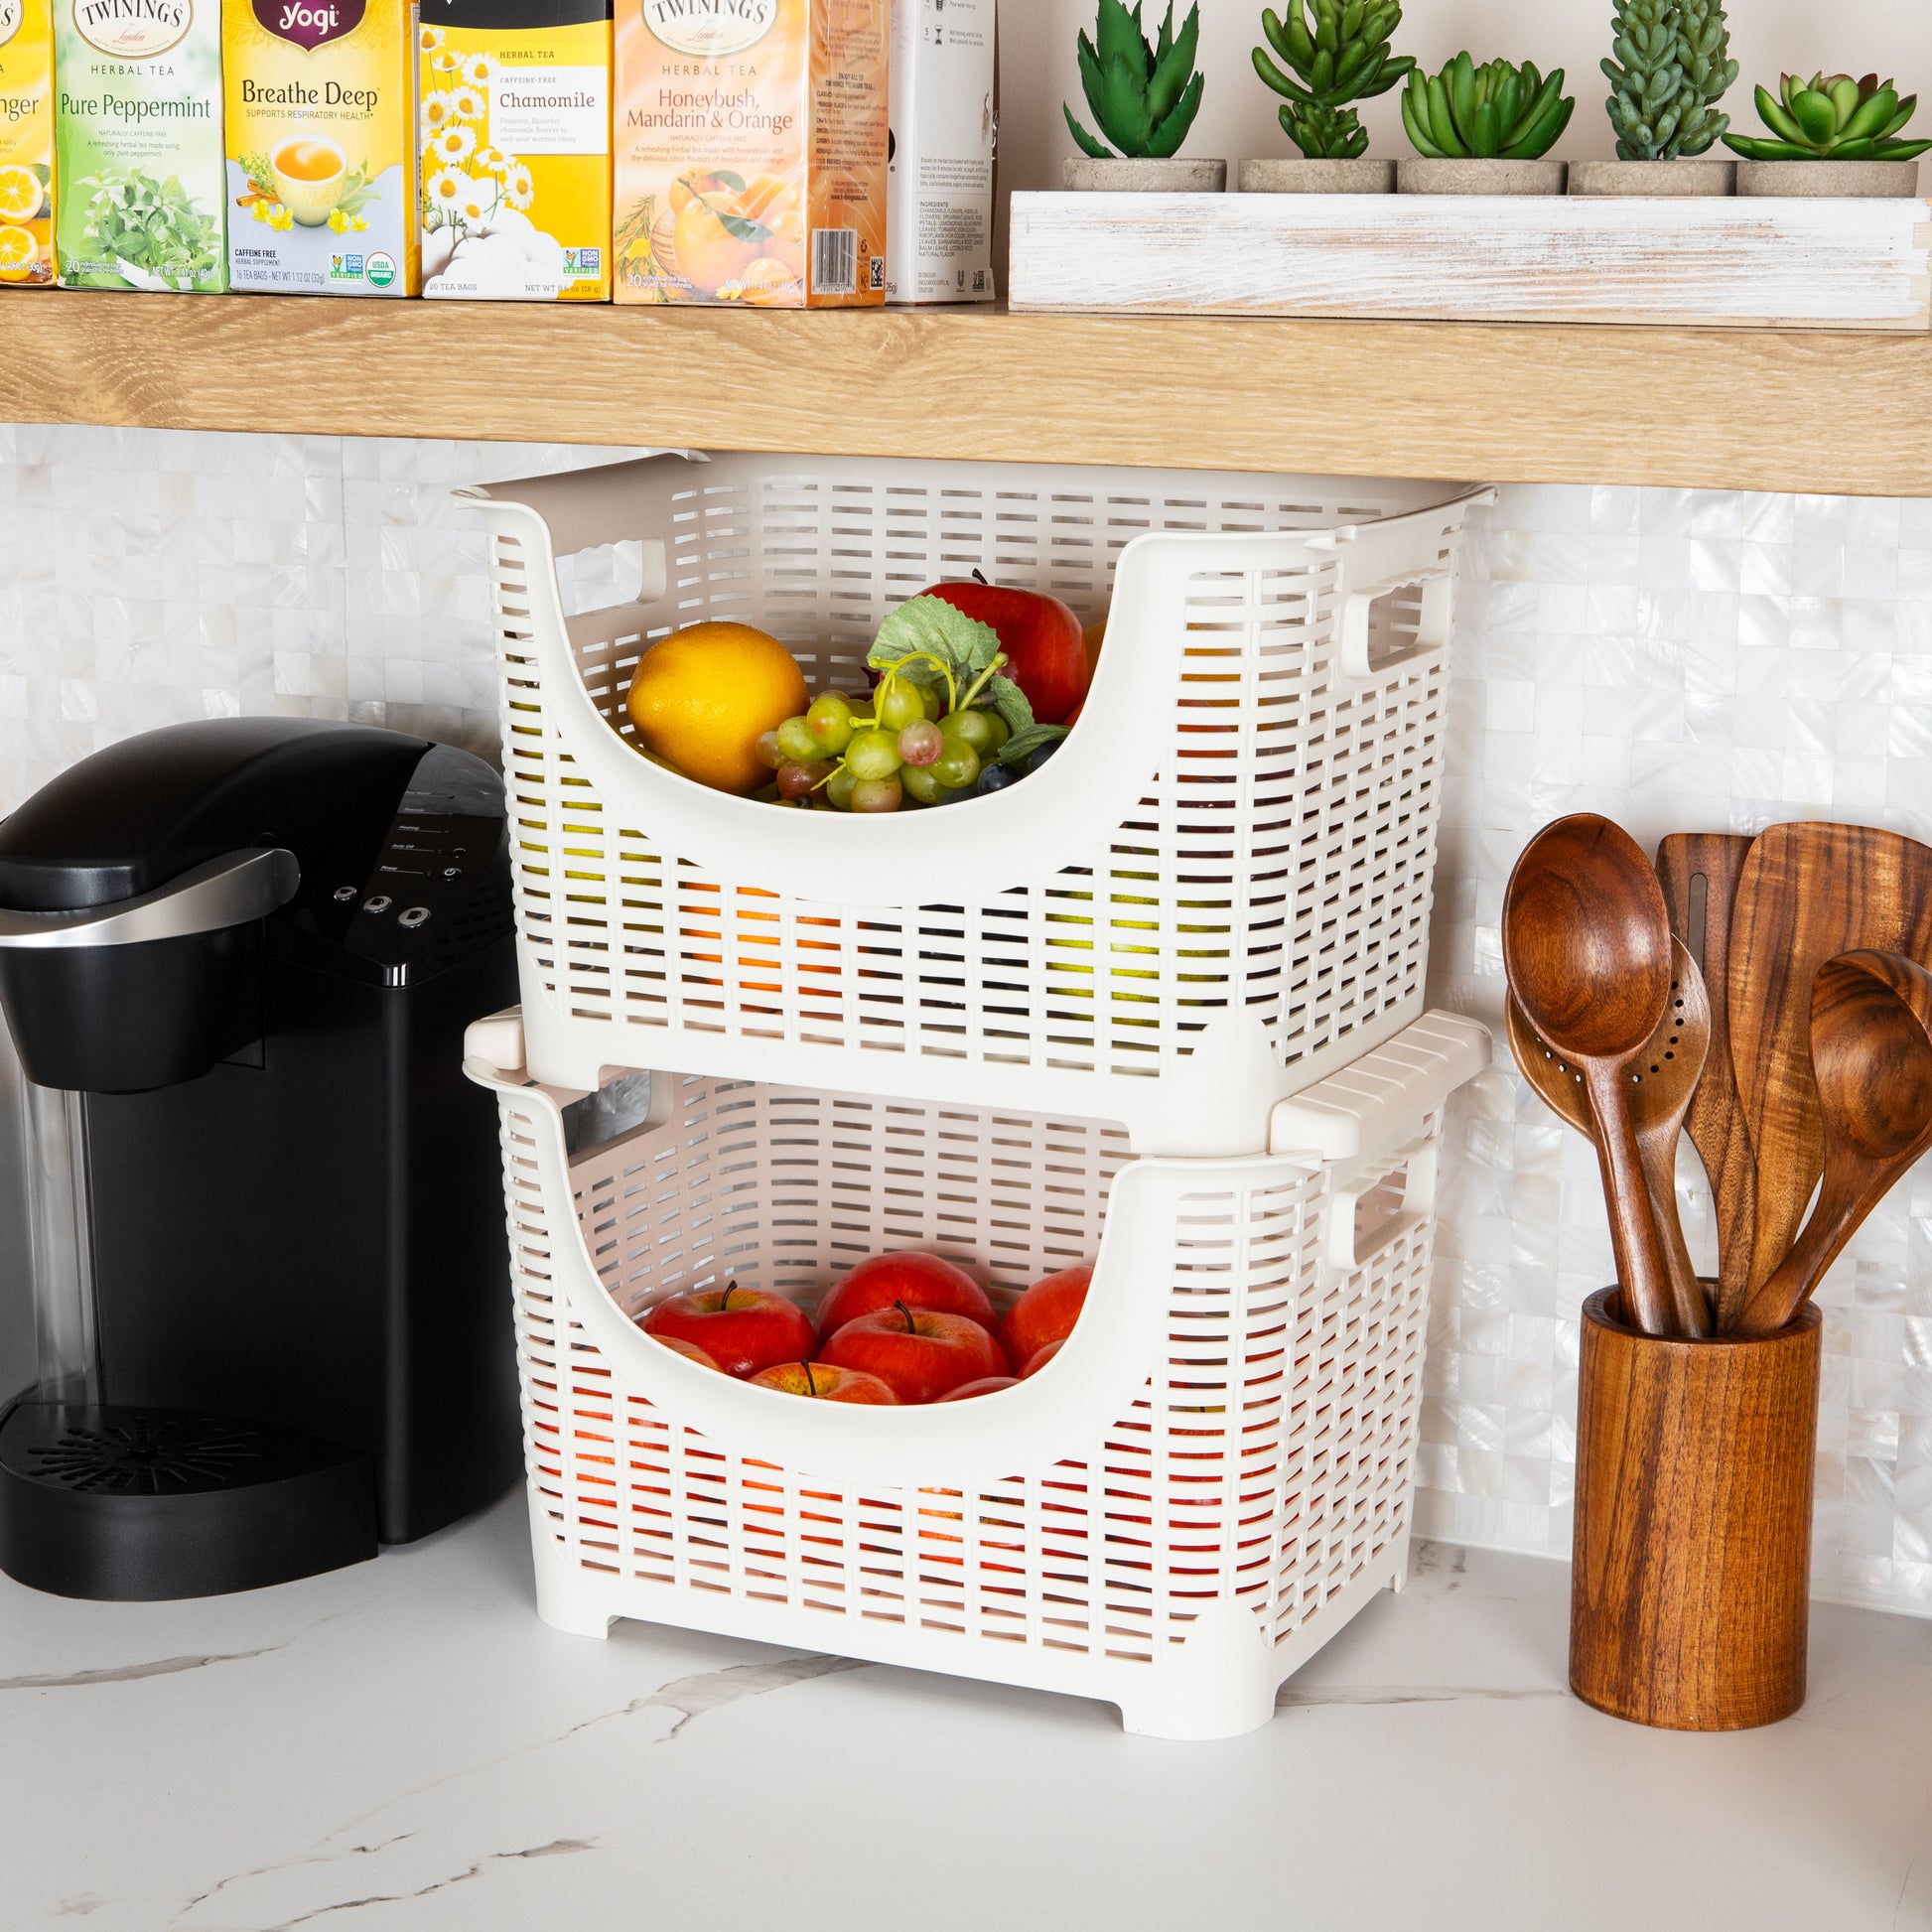 Plastic Basket, Small | THE STABLE COLLECTION | Multi-Use Storage Basket |  Rectangular Cabinet Organizer | Baskets for Organizing with Handles | Home